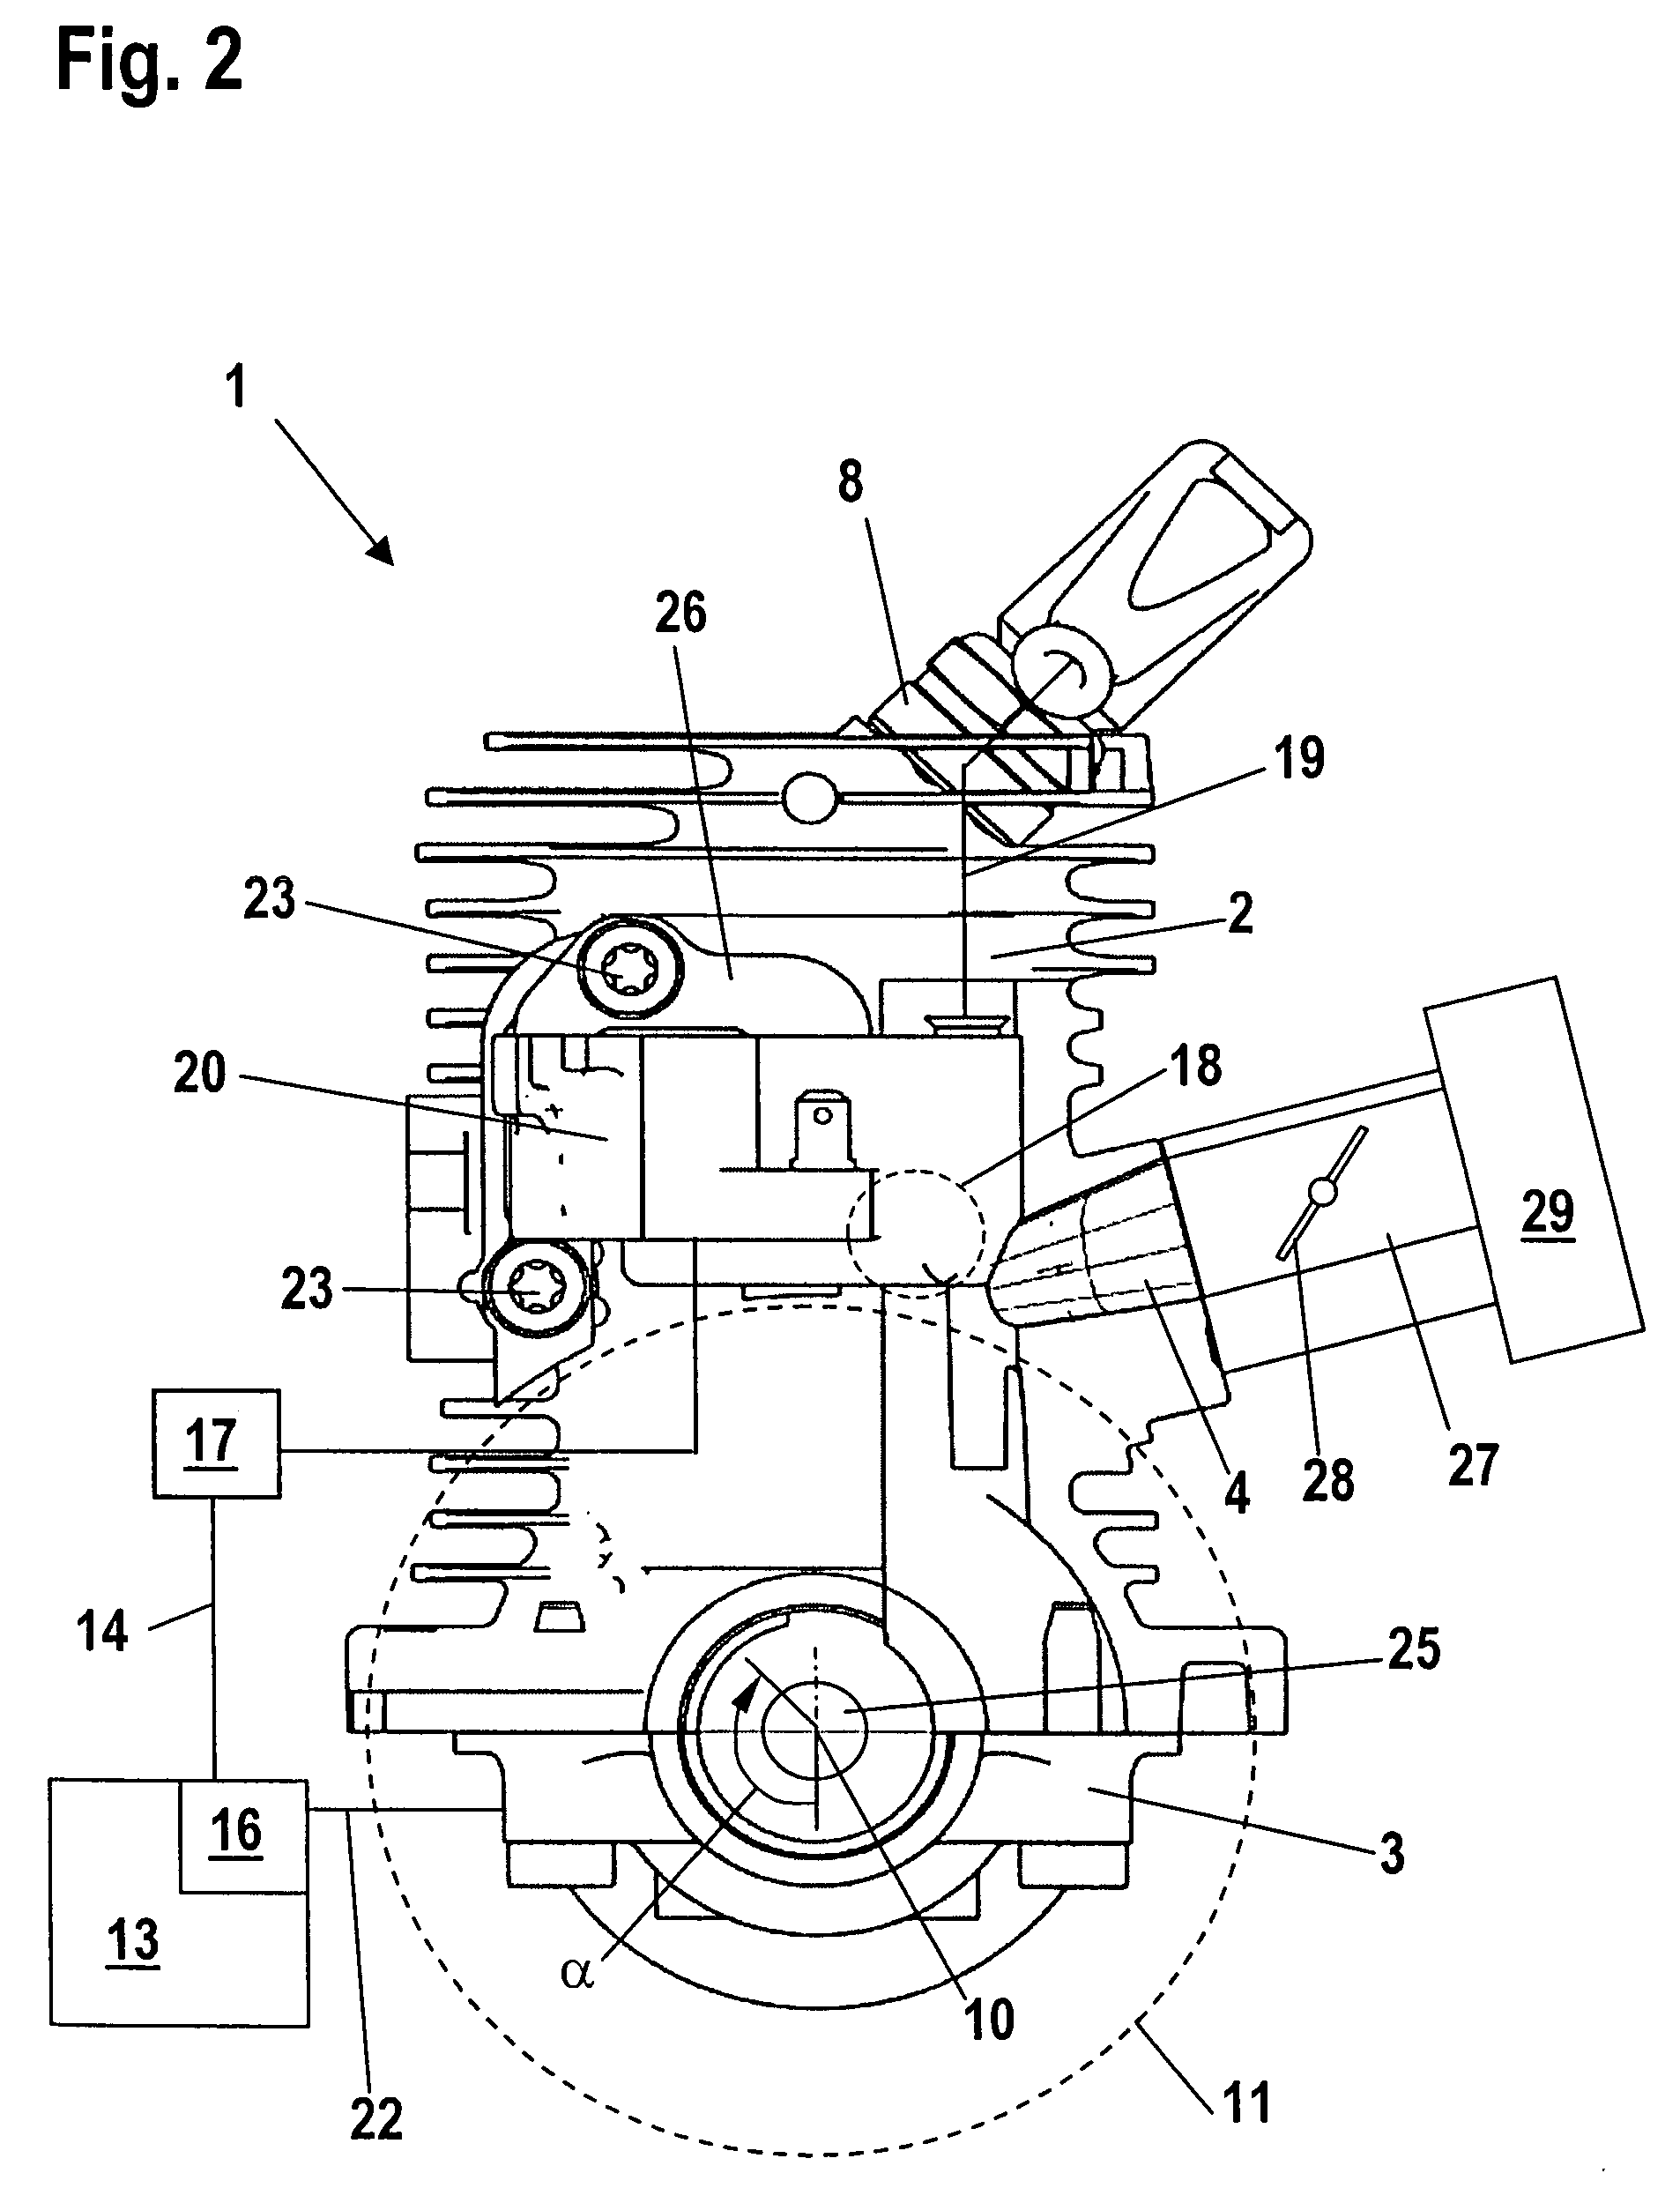 Method of operating a single cylinder two-stroke engine